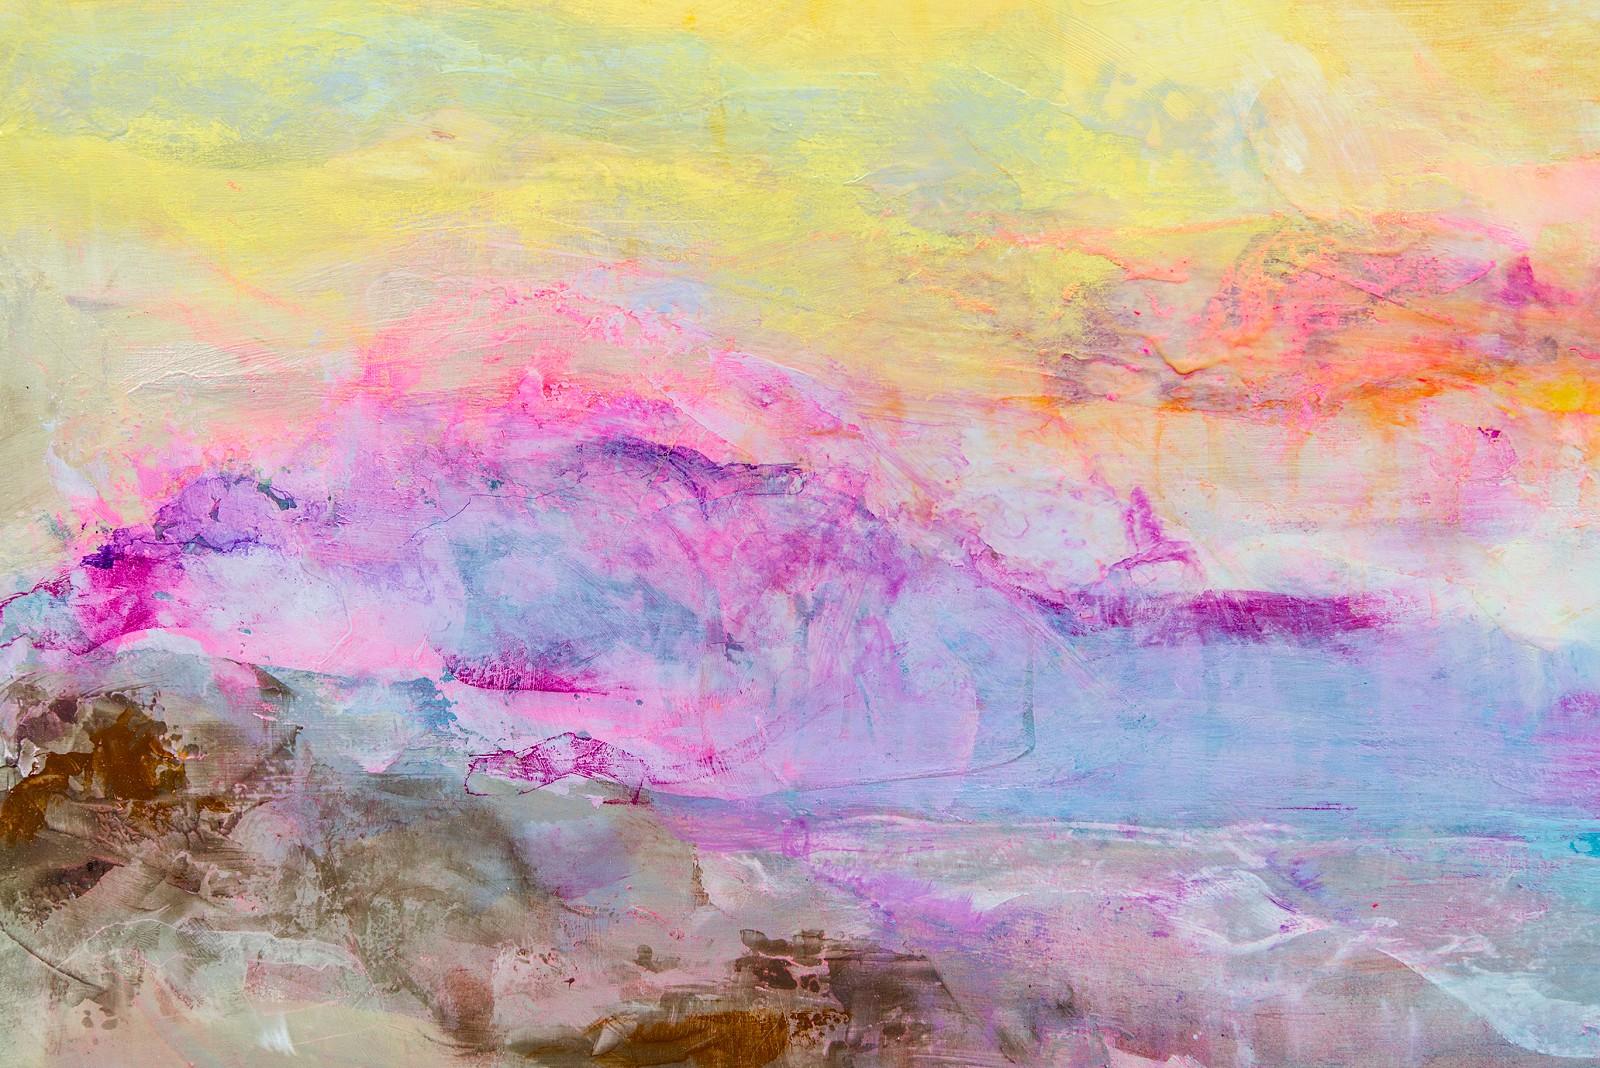 The Sun Set Her Pink - textured, vibrant, abstract, acrylic on canvas - Contemporary Painting by Sharon Kelly